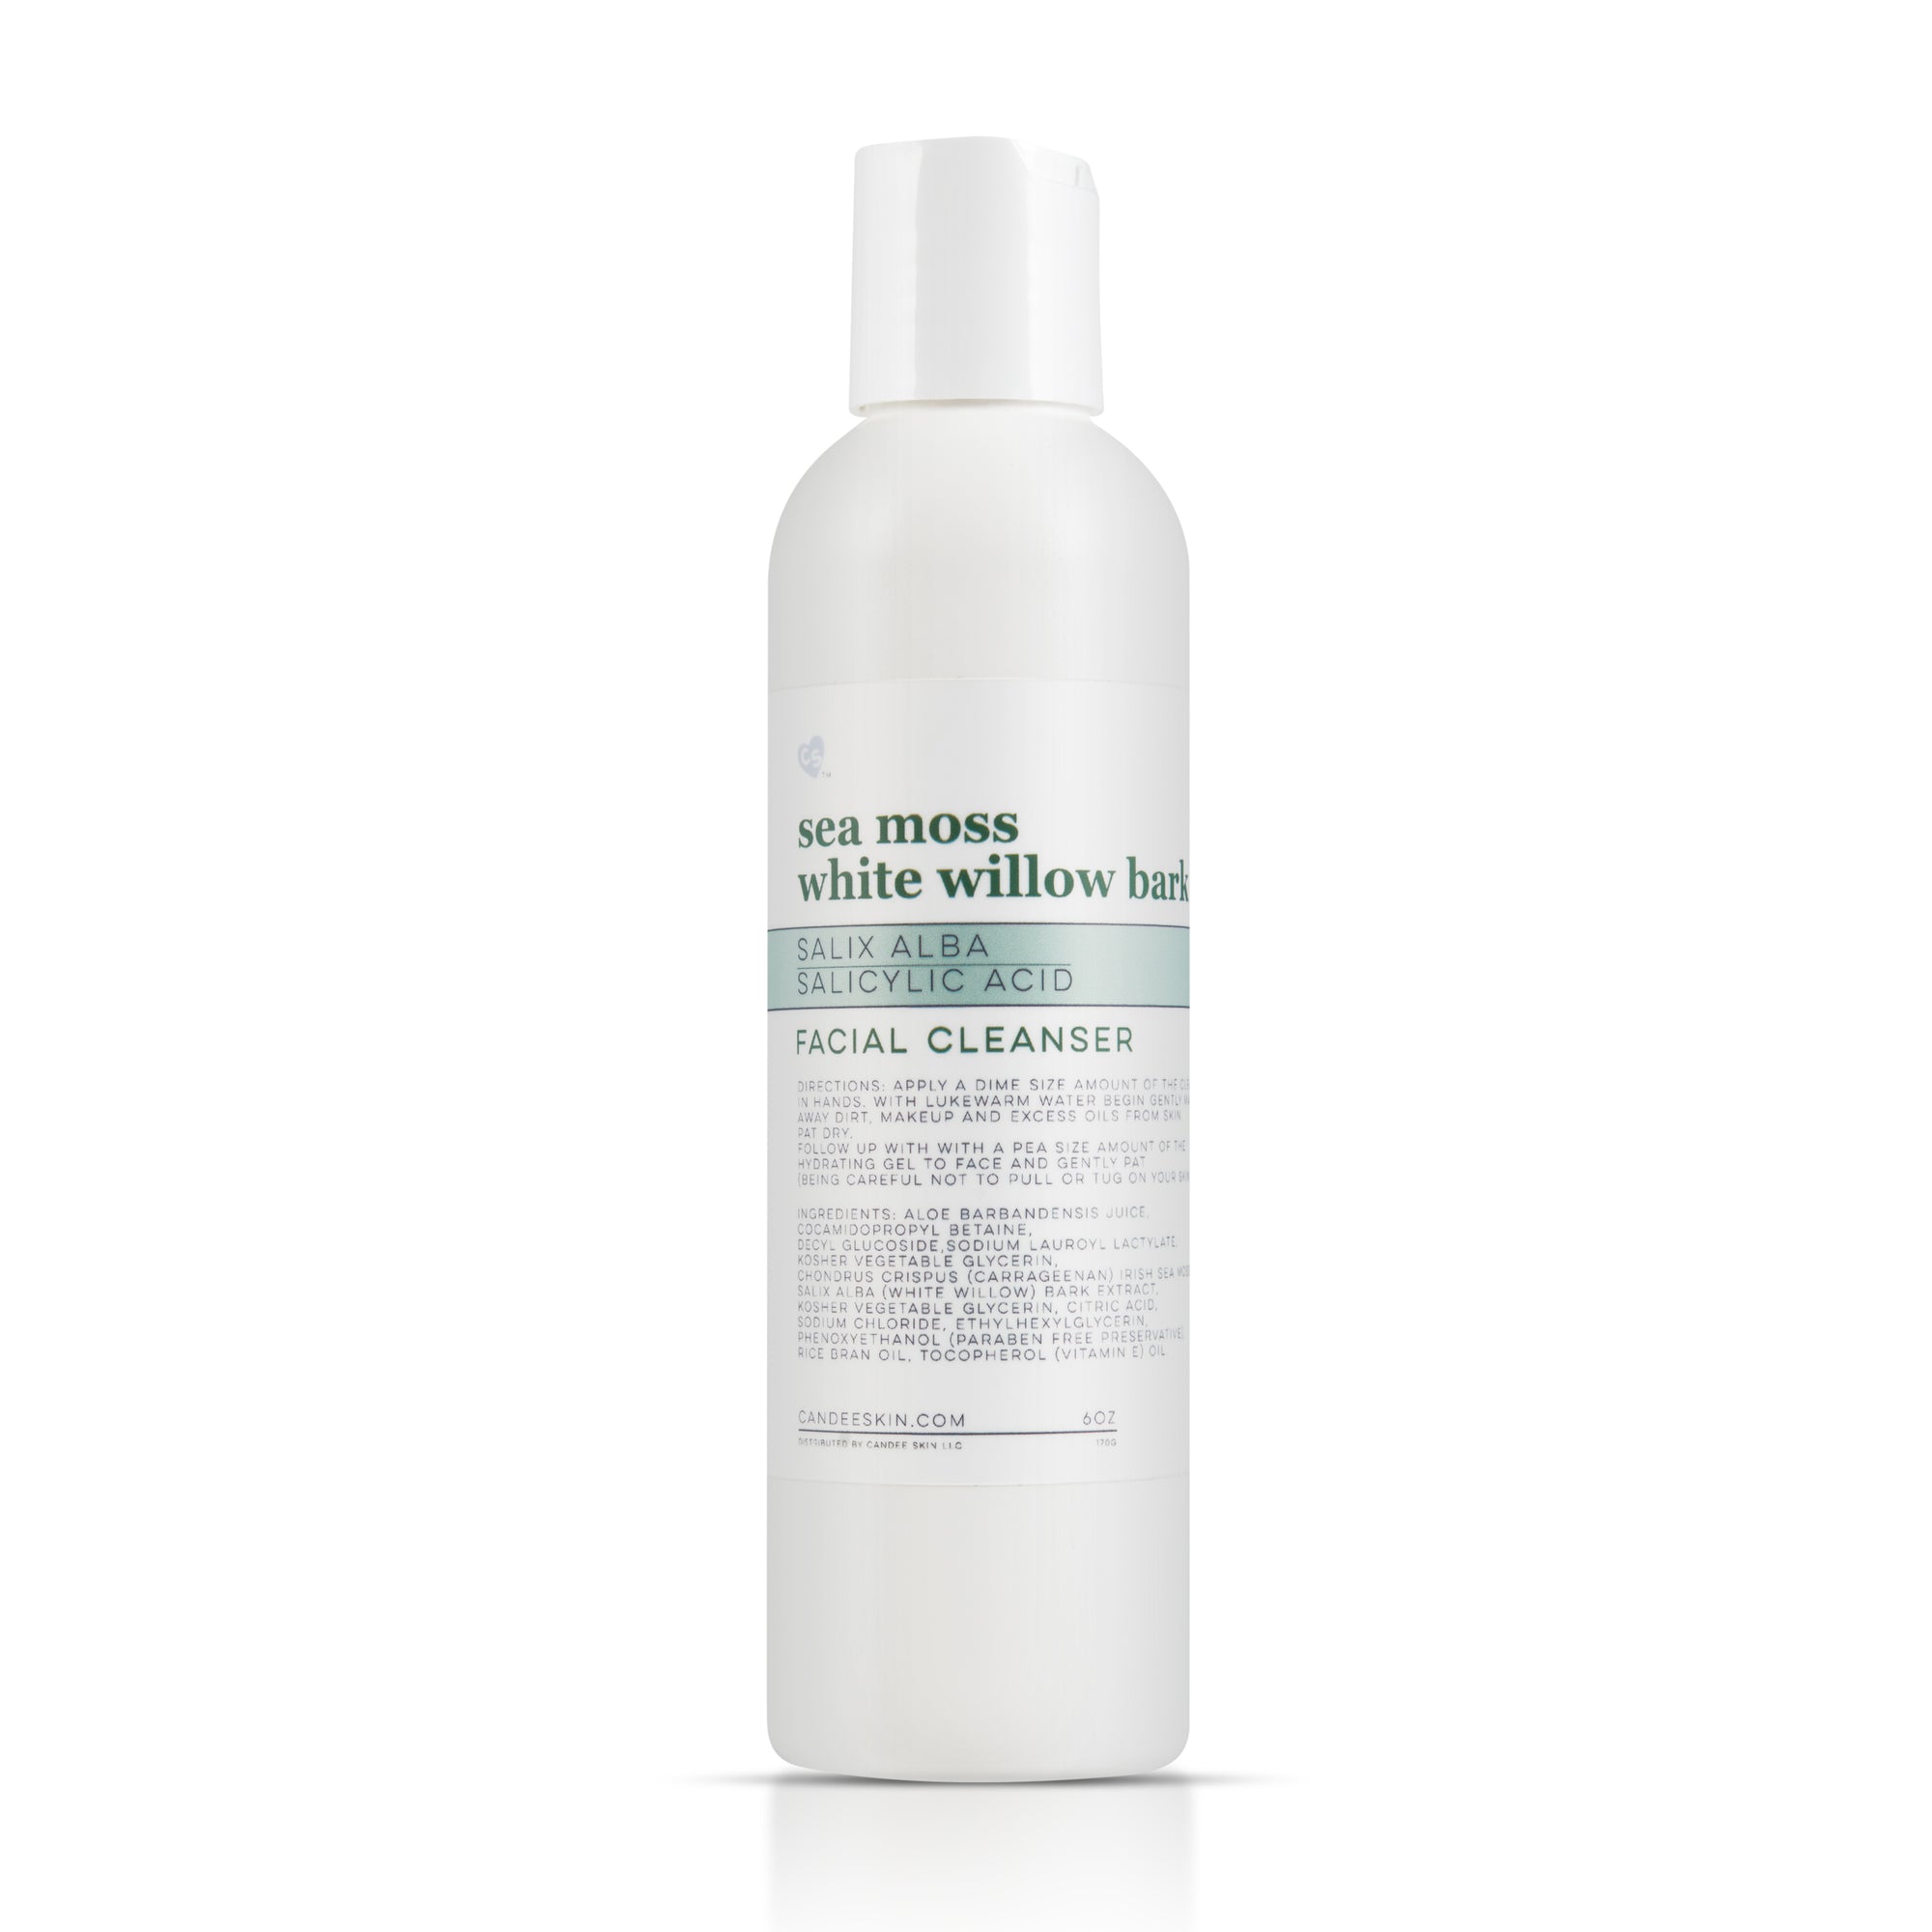 Sea Moss-White Willow Bark Facial Cleanser. Candee Skin Products. Simplified Skin Care Science.